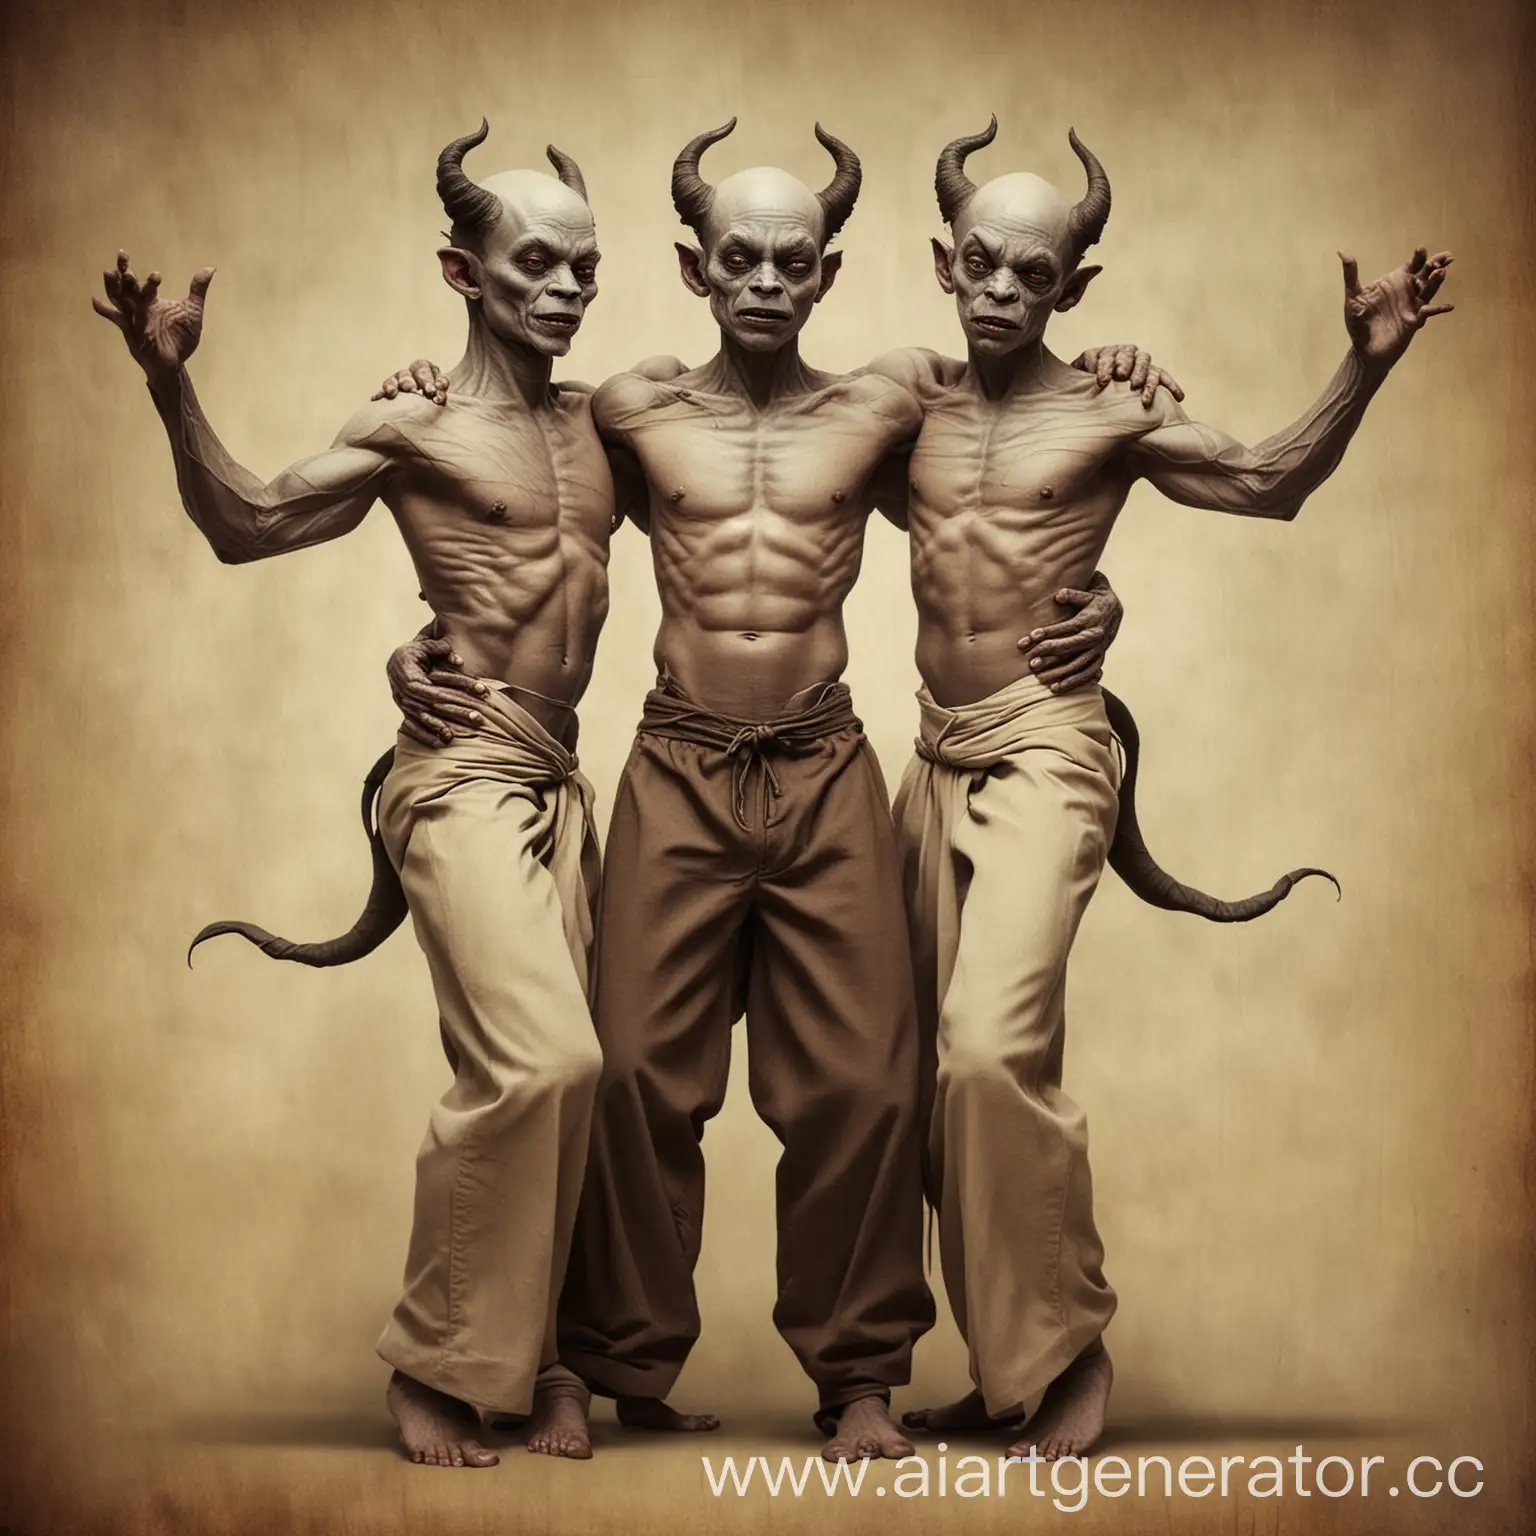 Make picture of demons are Siamese twins (male,with one of their arms up,adults,connected on hip level)